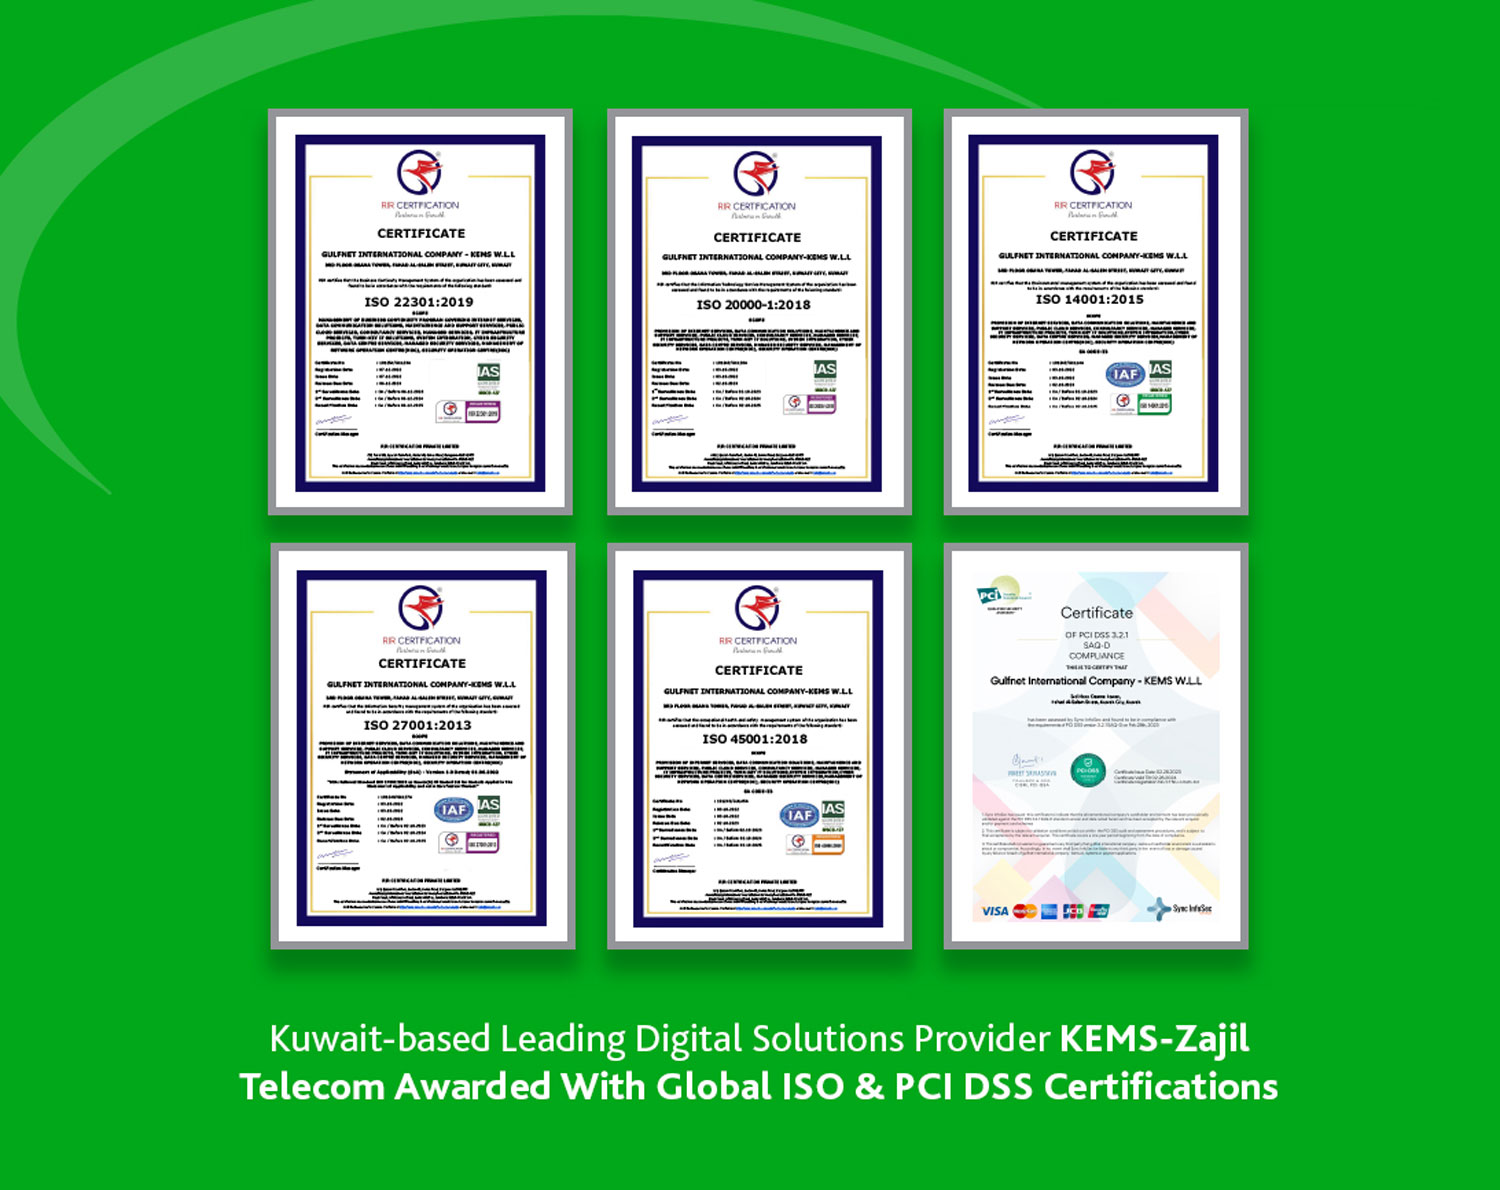 Kuwait-based Leading Digital Solutions Provider KEMS-Zajil Telecom Awarded With Global ISO & PCI DSS Certifications